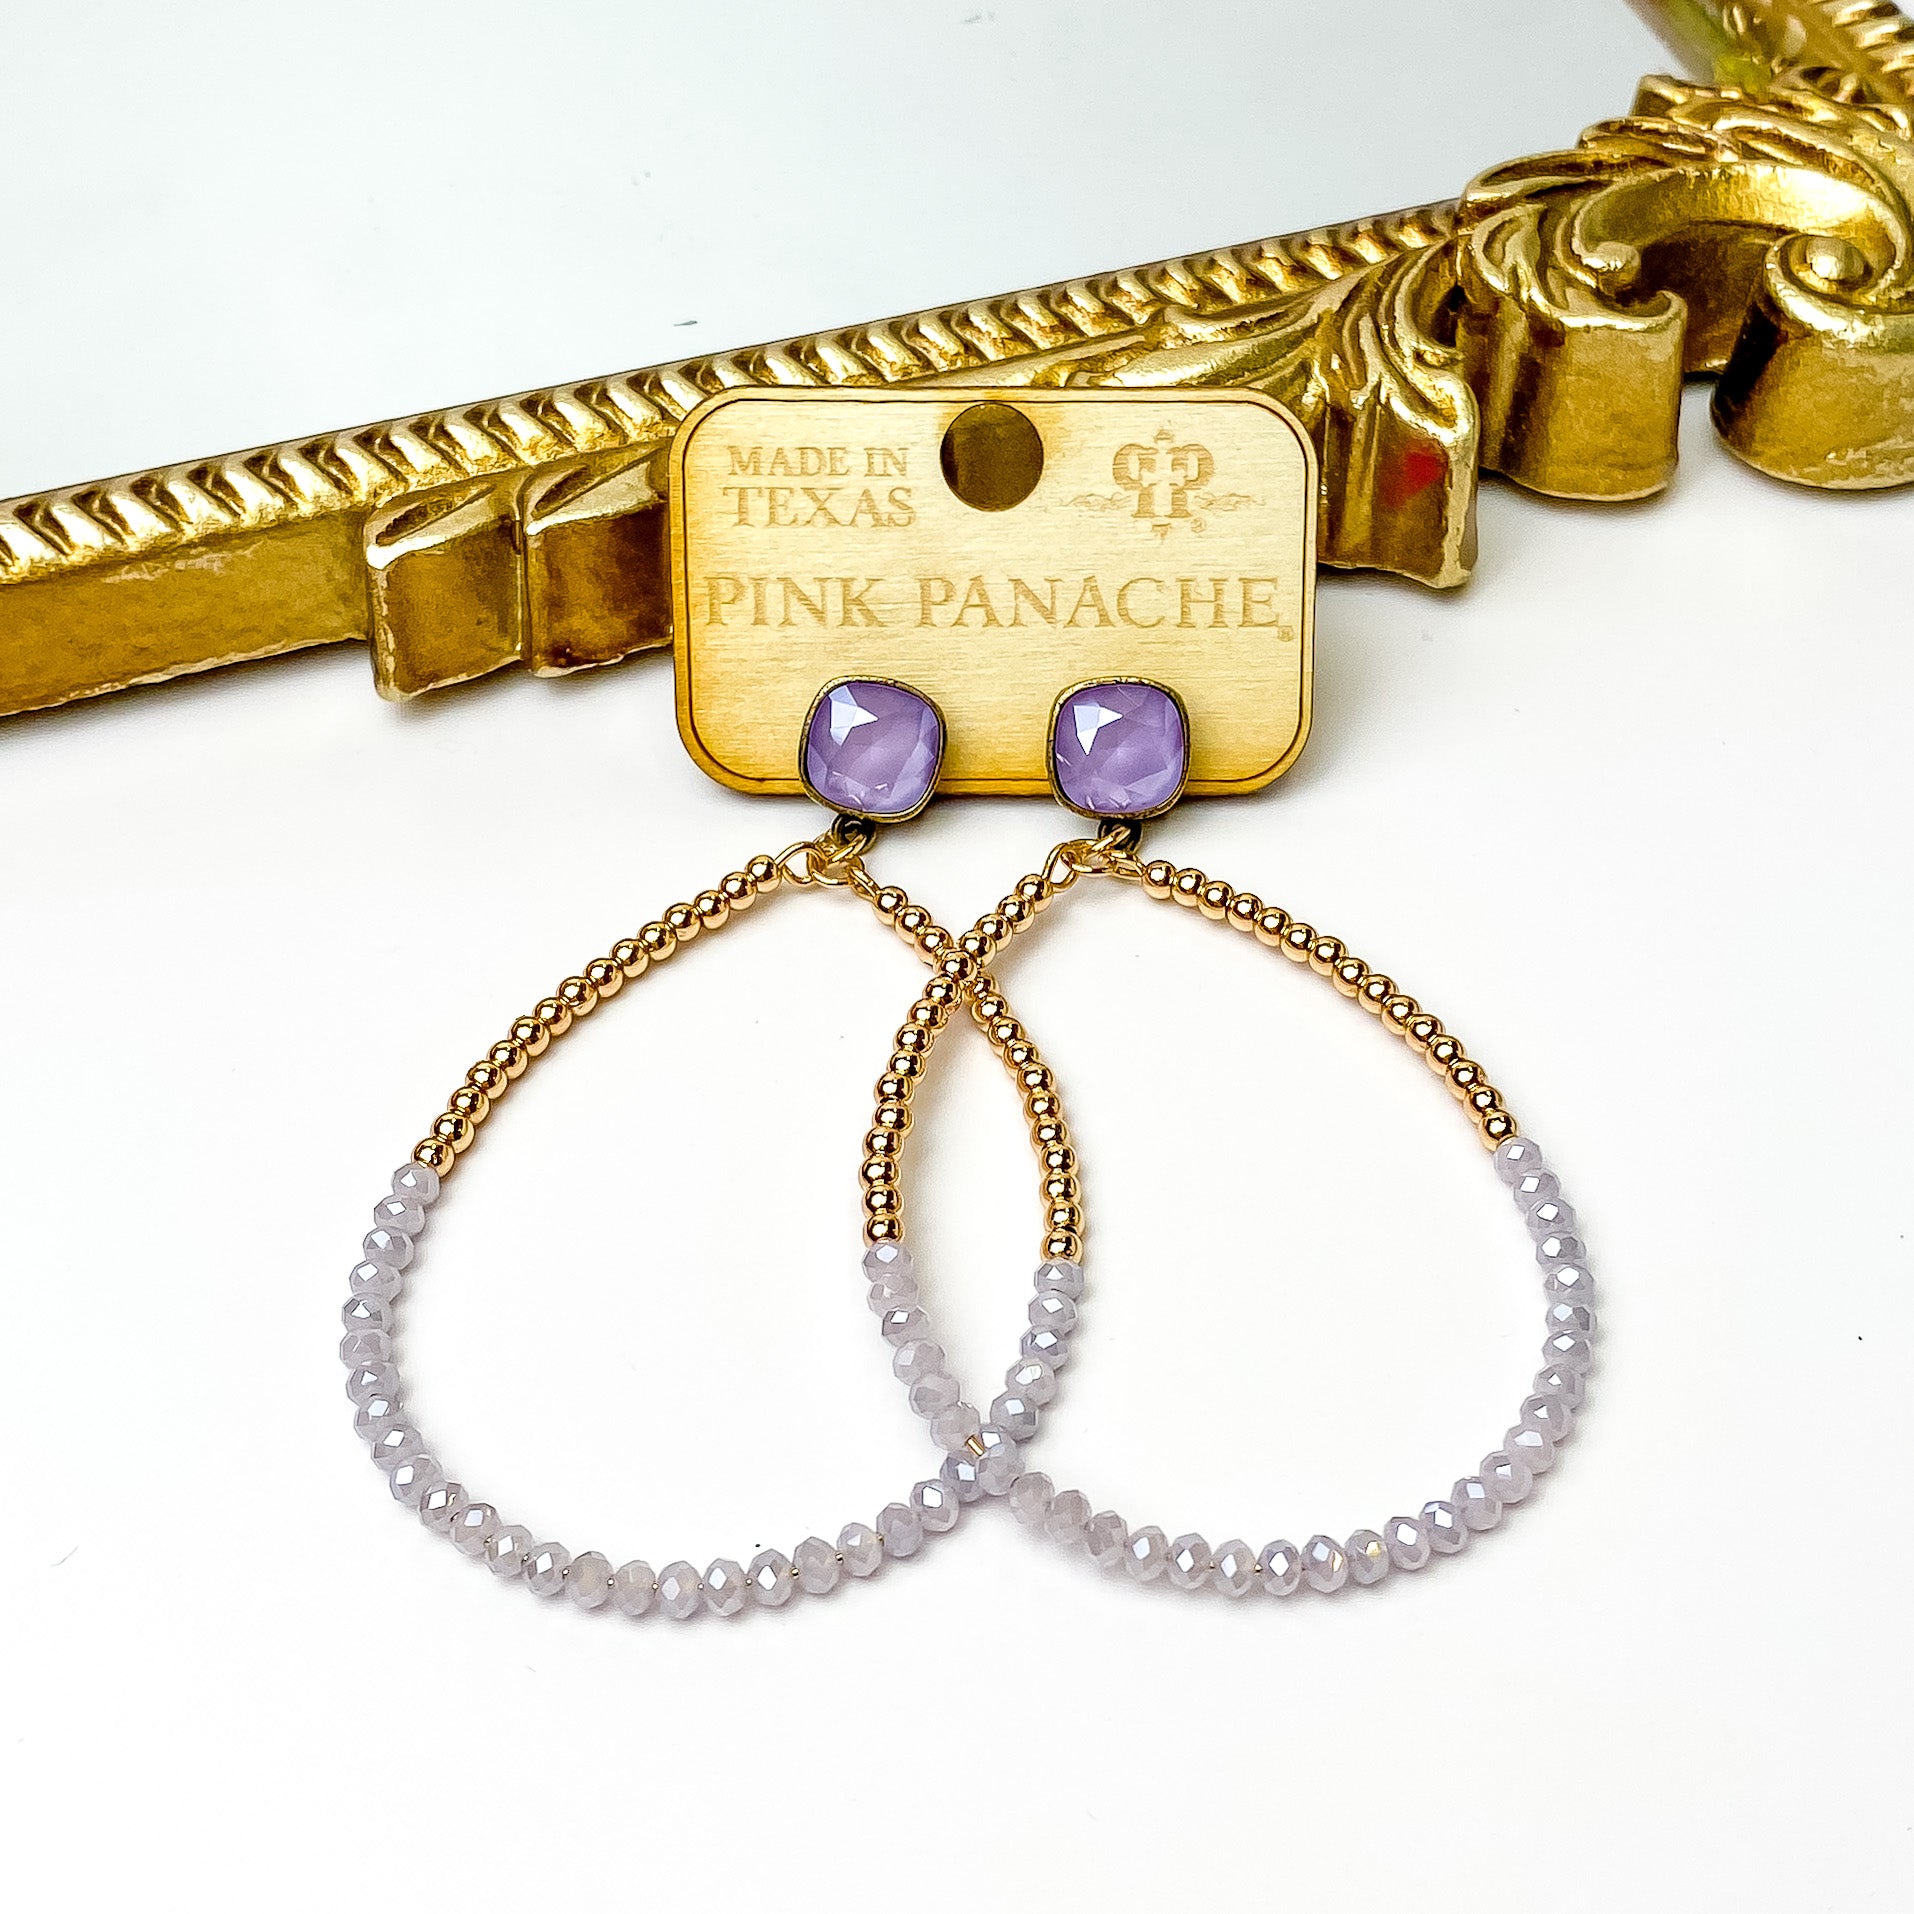 Lilac cushion cut crystal stud earrings with a teardrop pendant. The pendant is half gold beads and half lavender crystal beads. These earrings are pictured on a wood earrings holder in front of a gold mirror on a white background. 